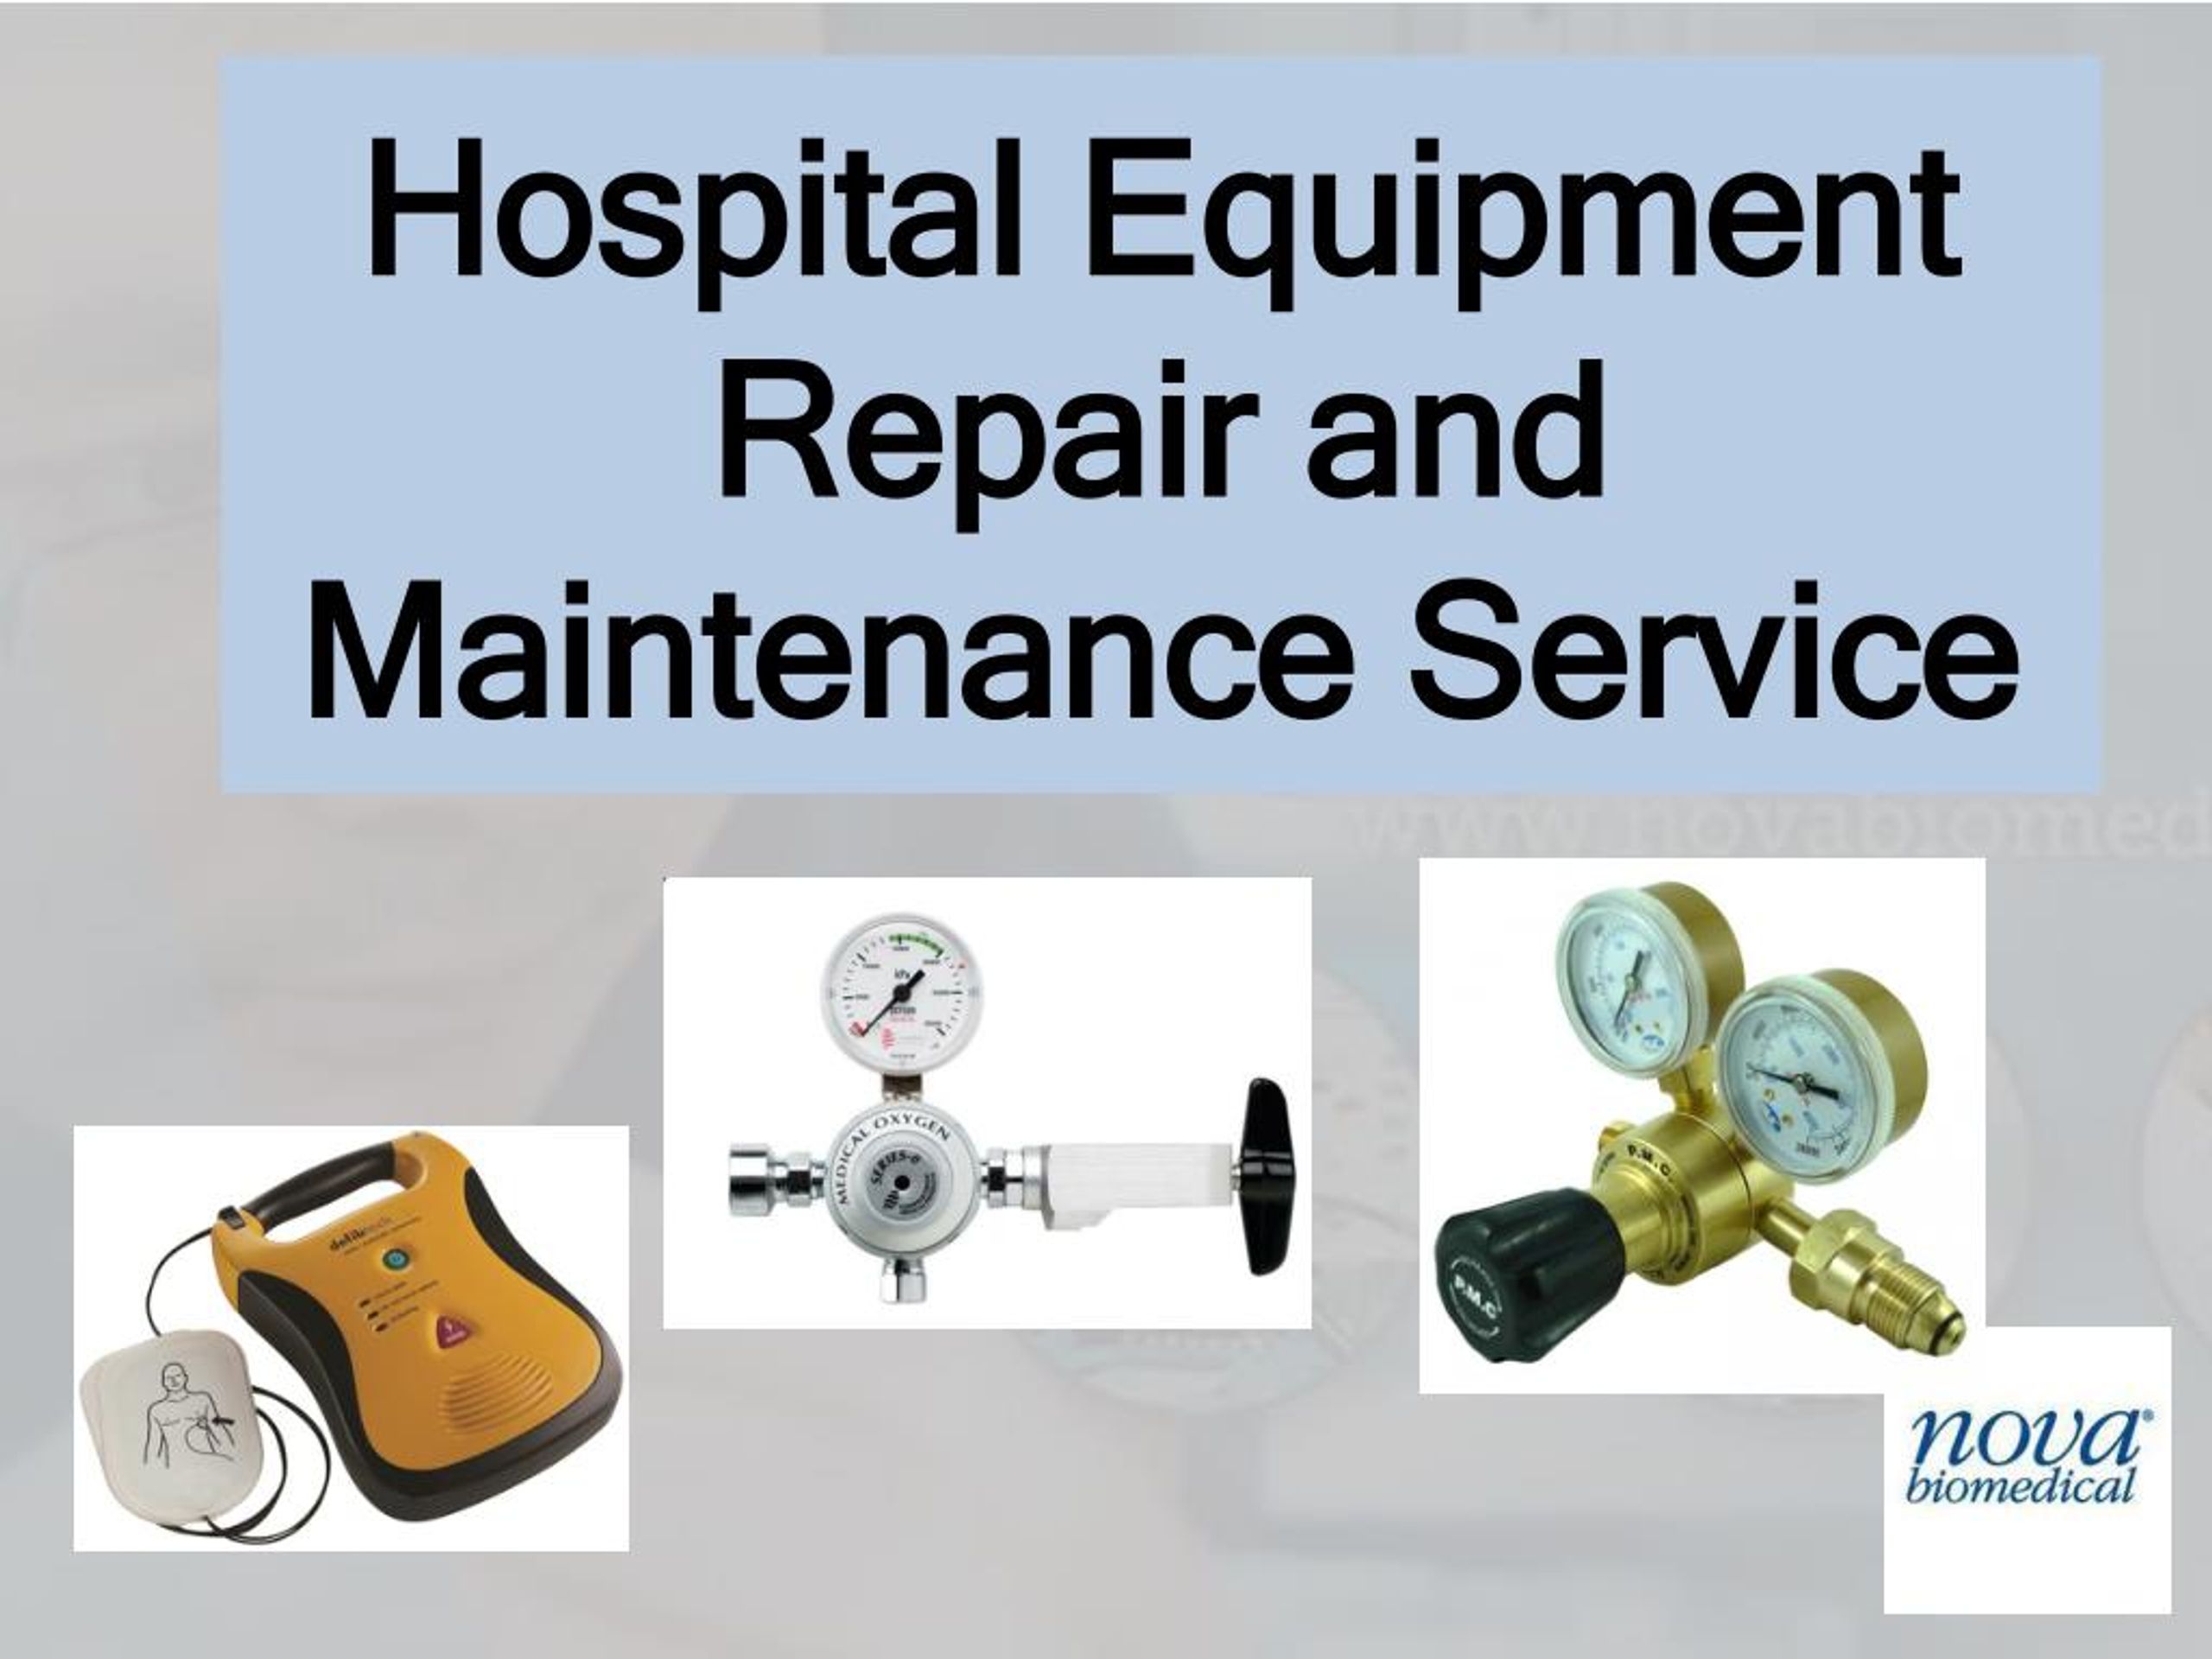 PPT - Hospital Equipment Repair and Maintenance Service PowerPoint  Presentation - ID:7248642